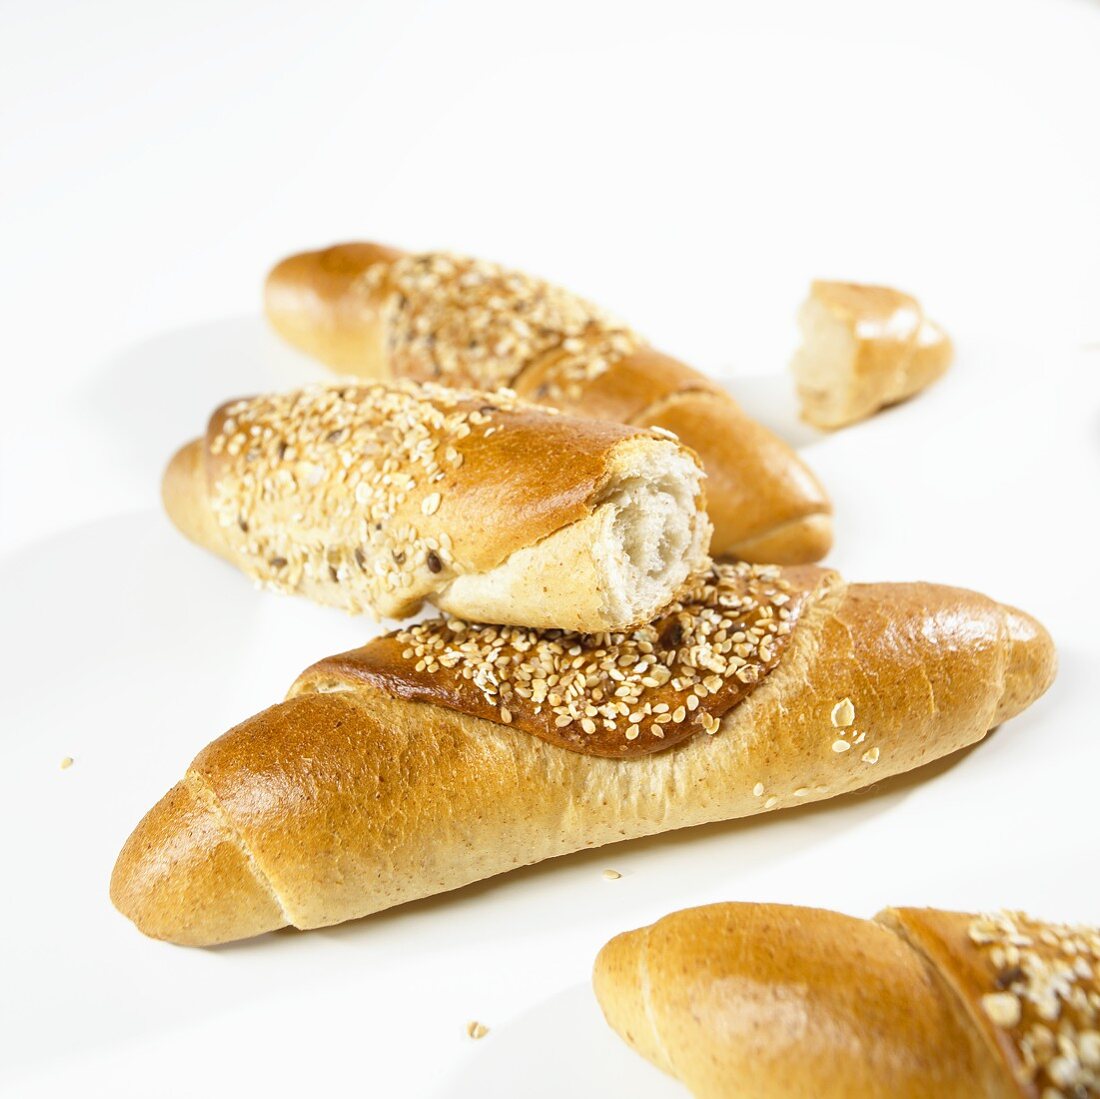 Several grain baguettes, whole and broken